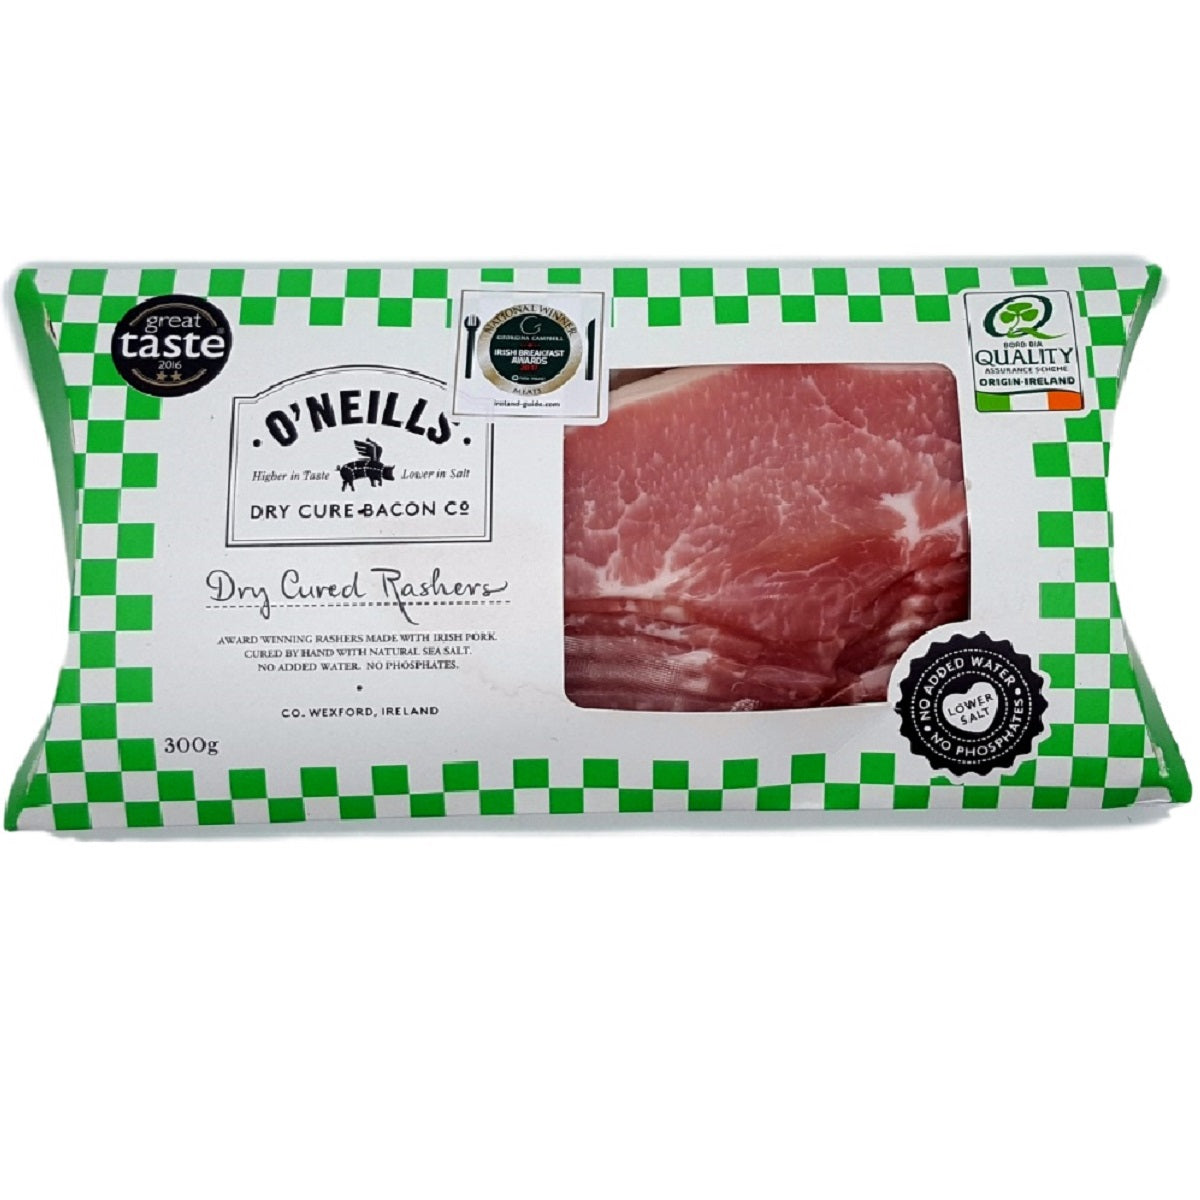 O'Neills Dry Cure Bacon Co Dry Cured Rashers 300g